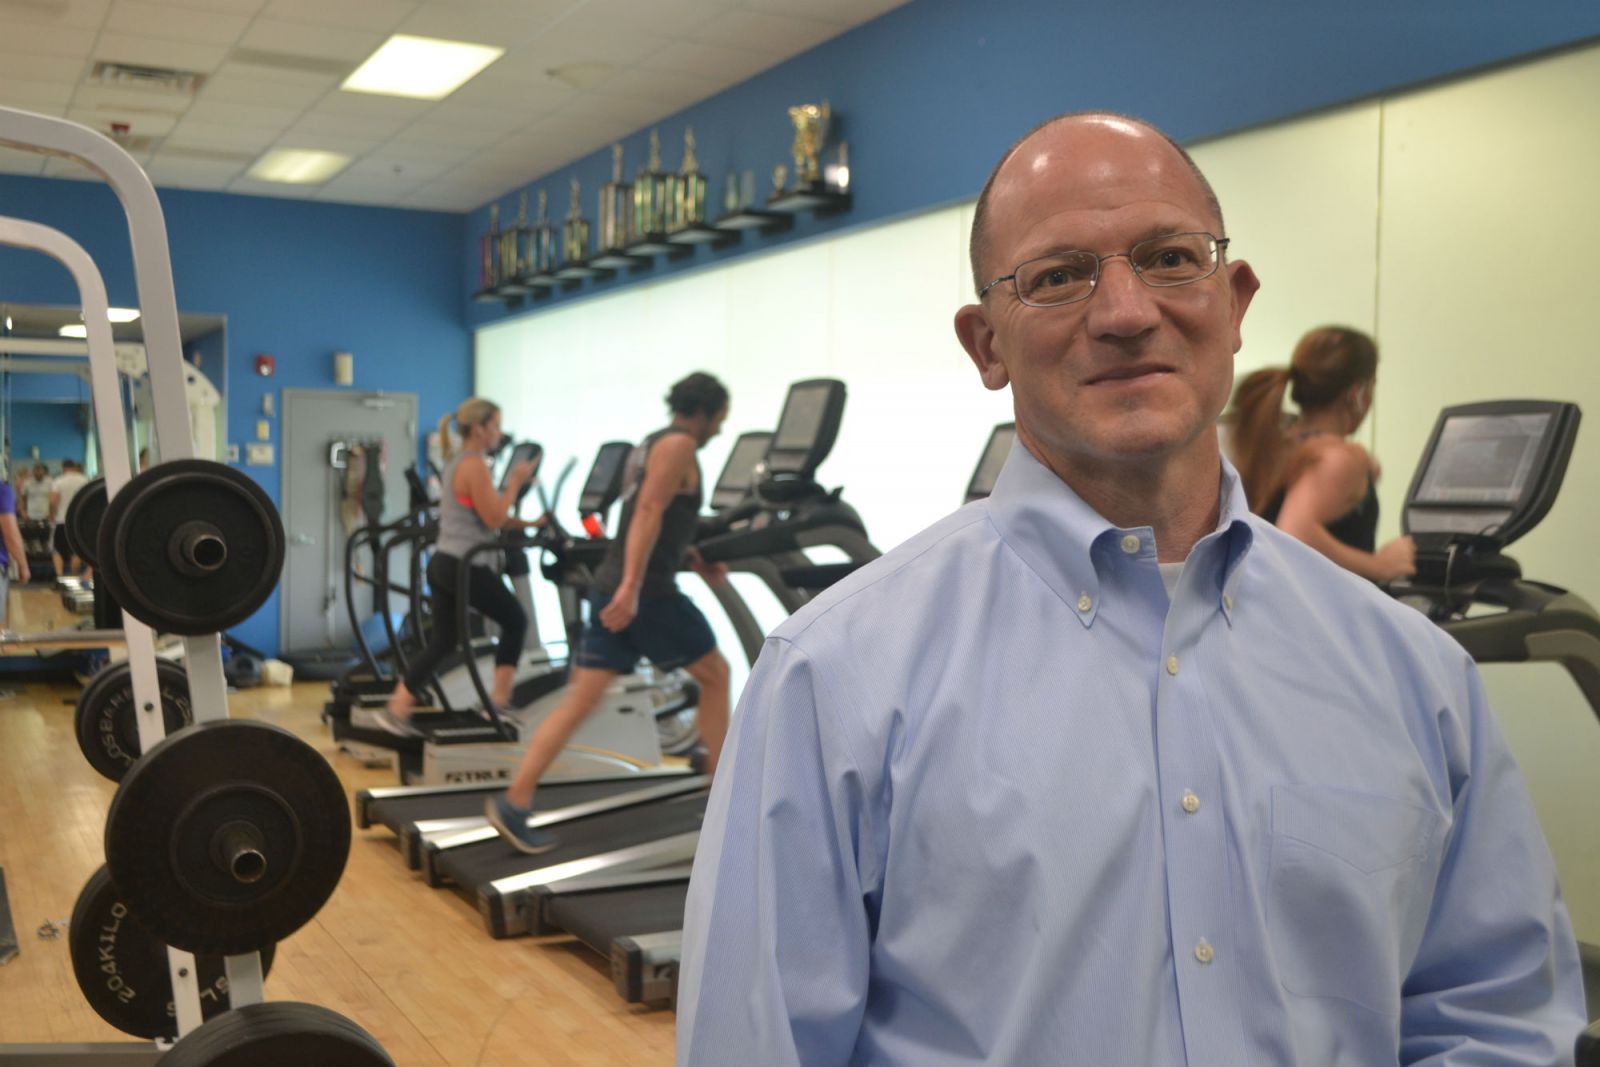 John Harvey, vice president of worldwide human resources for ScanSource, said his company's approach to wellness is a holistic one. (Photo/Teresa Cutlip)